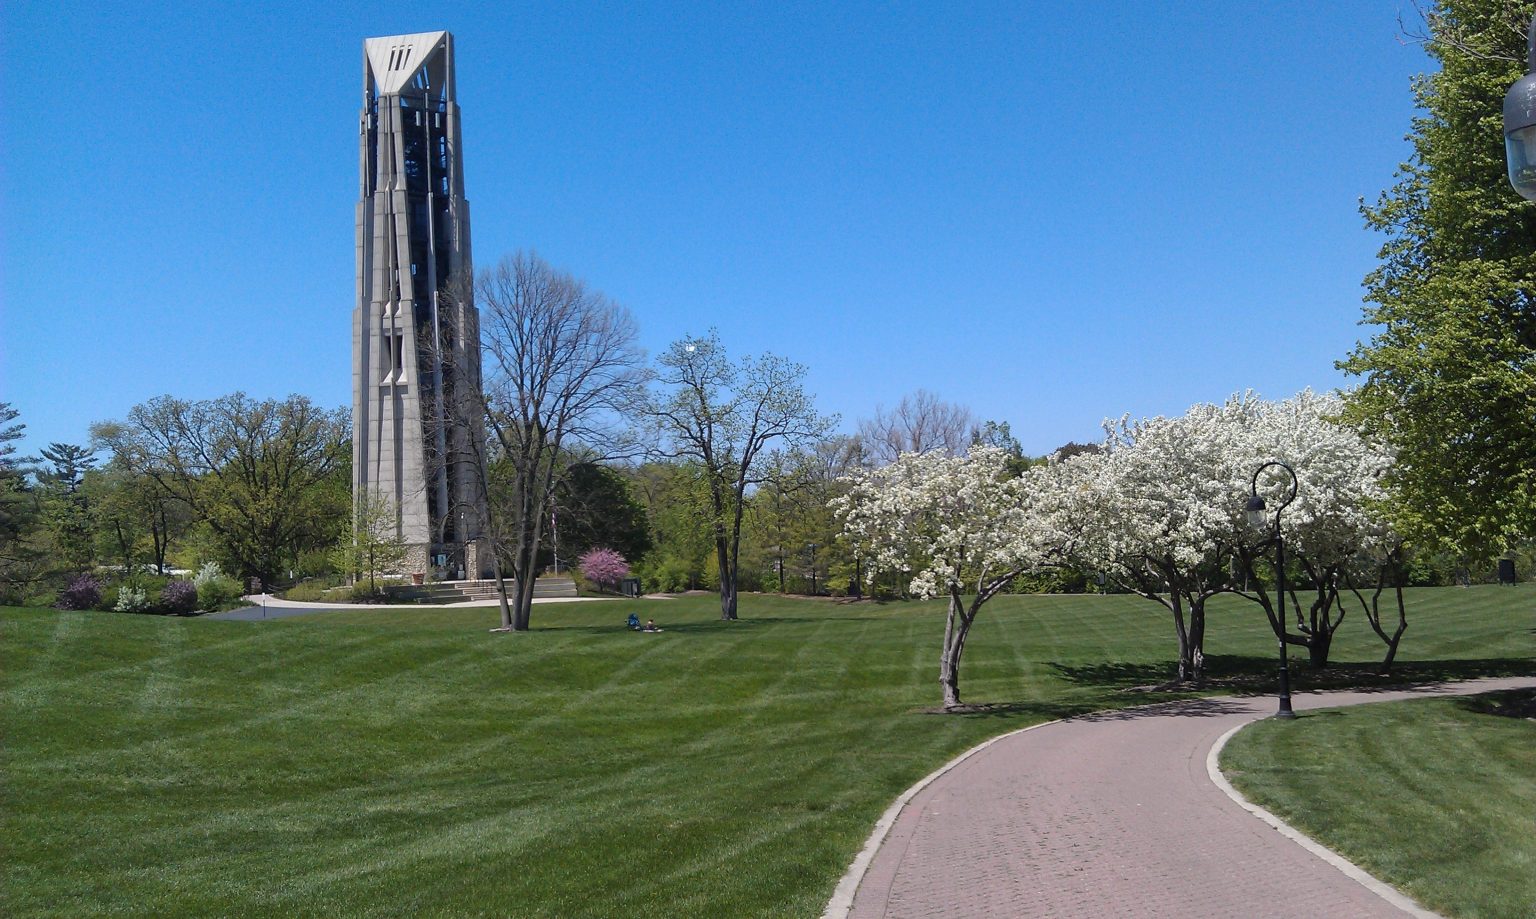 Naperville Carillon to feature concerts, blue lights to honor health